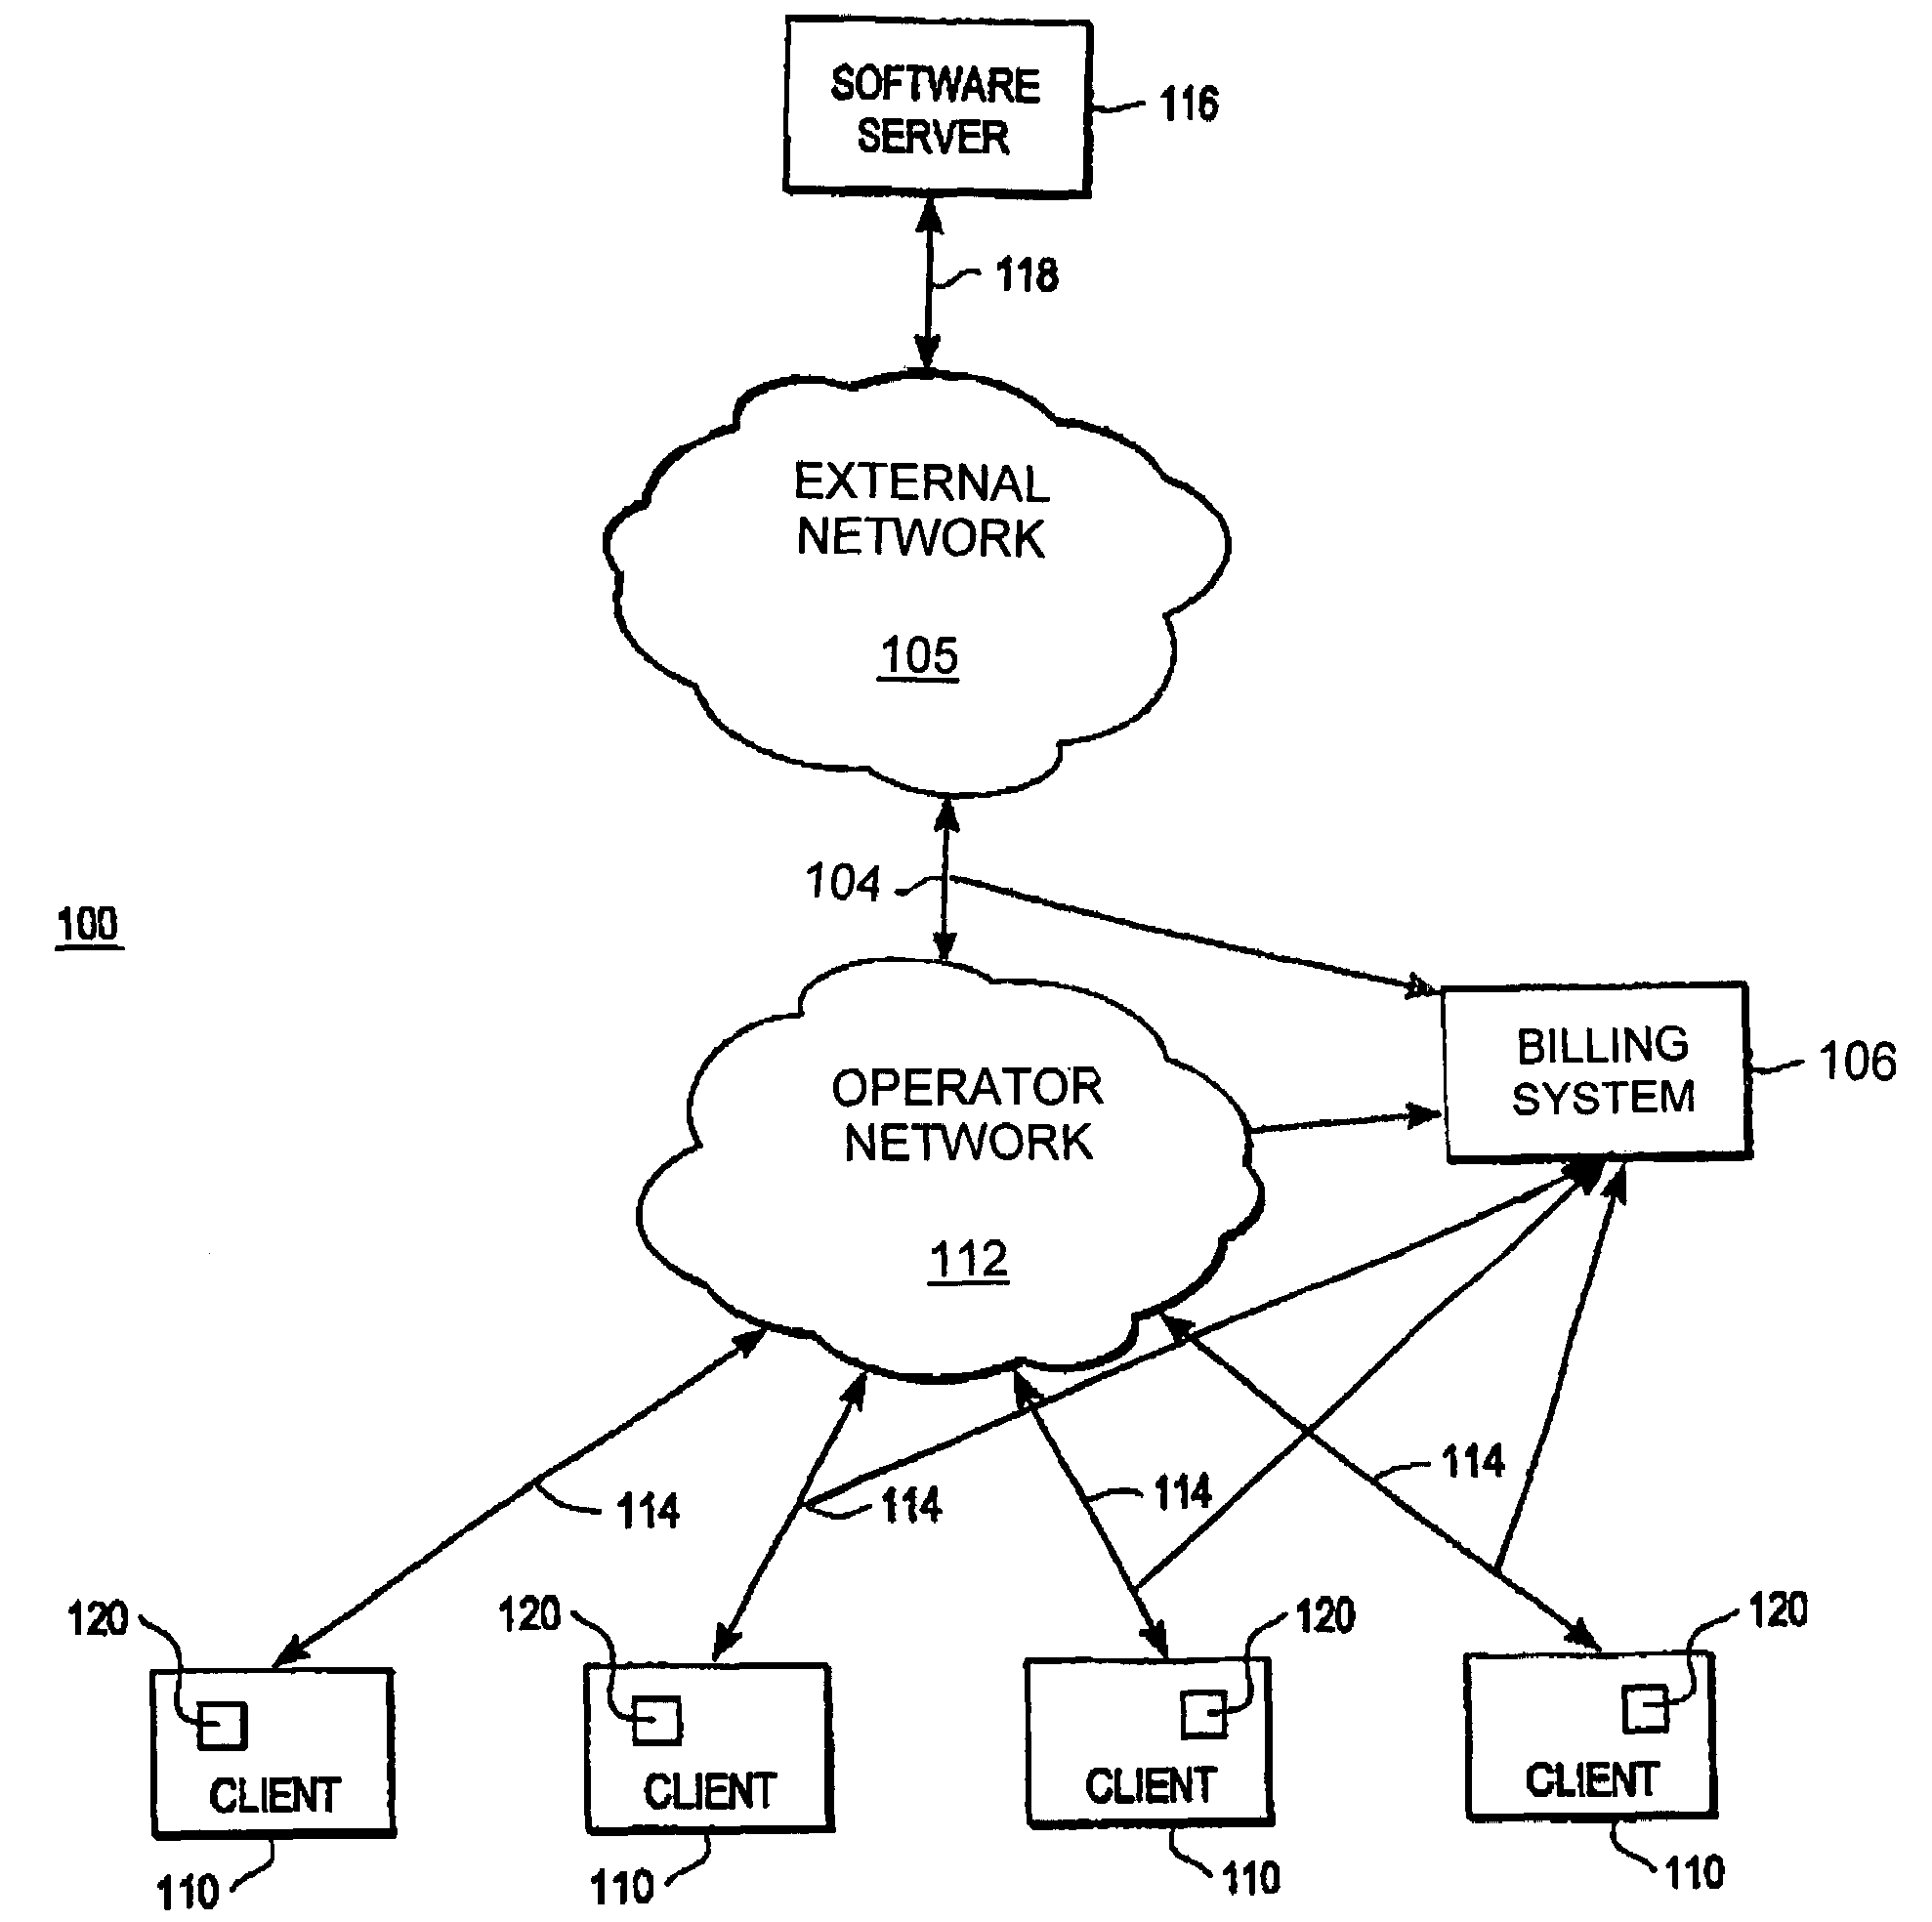 Cost control system for access to mobile services